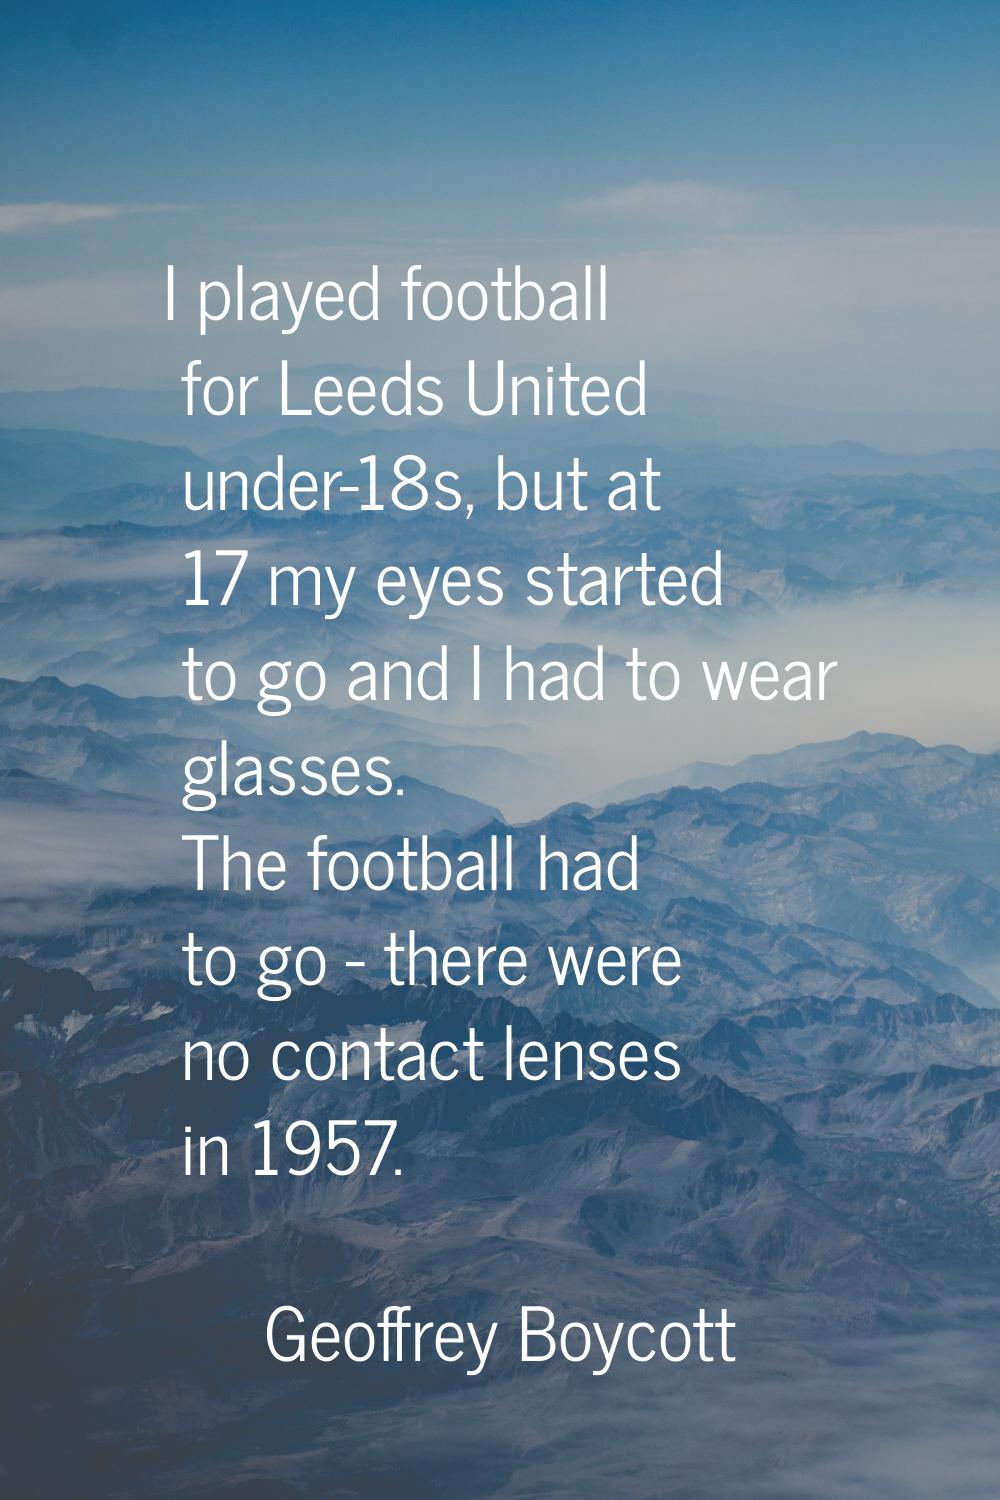 I played football for Leeds United under-18s, but at 17 my eyes started to go and I had to wear gla